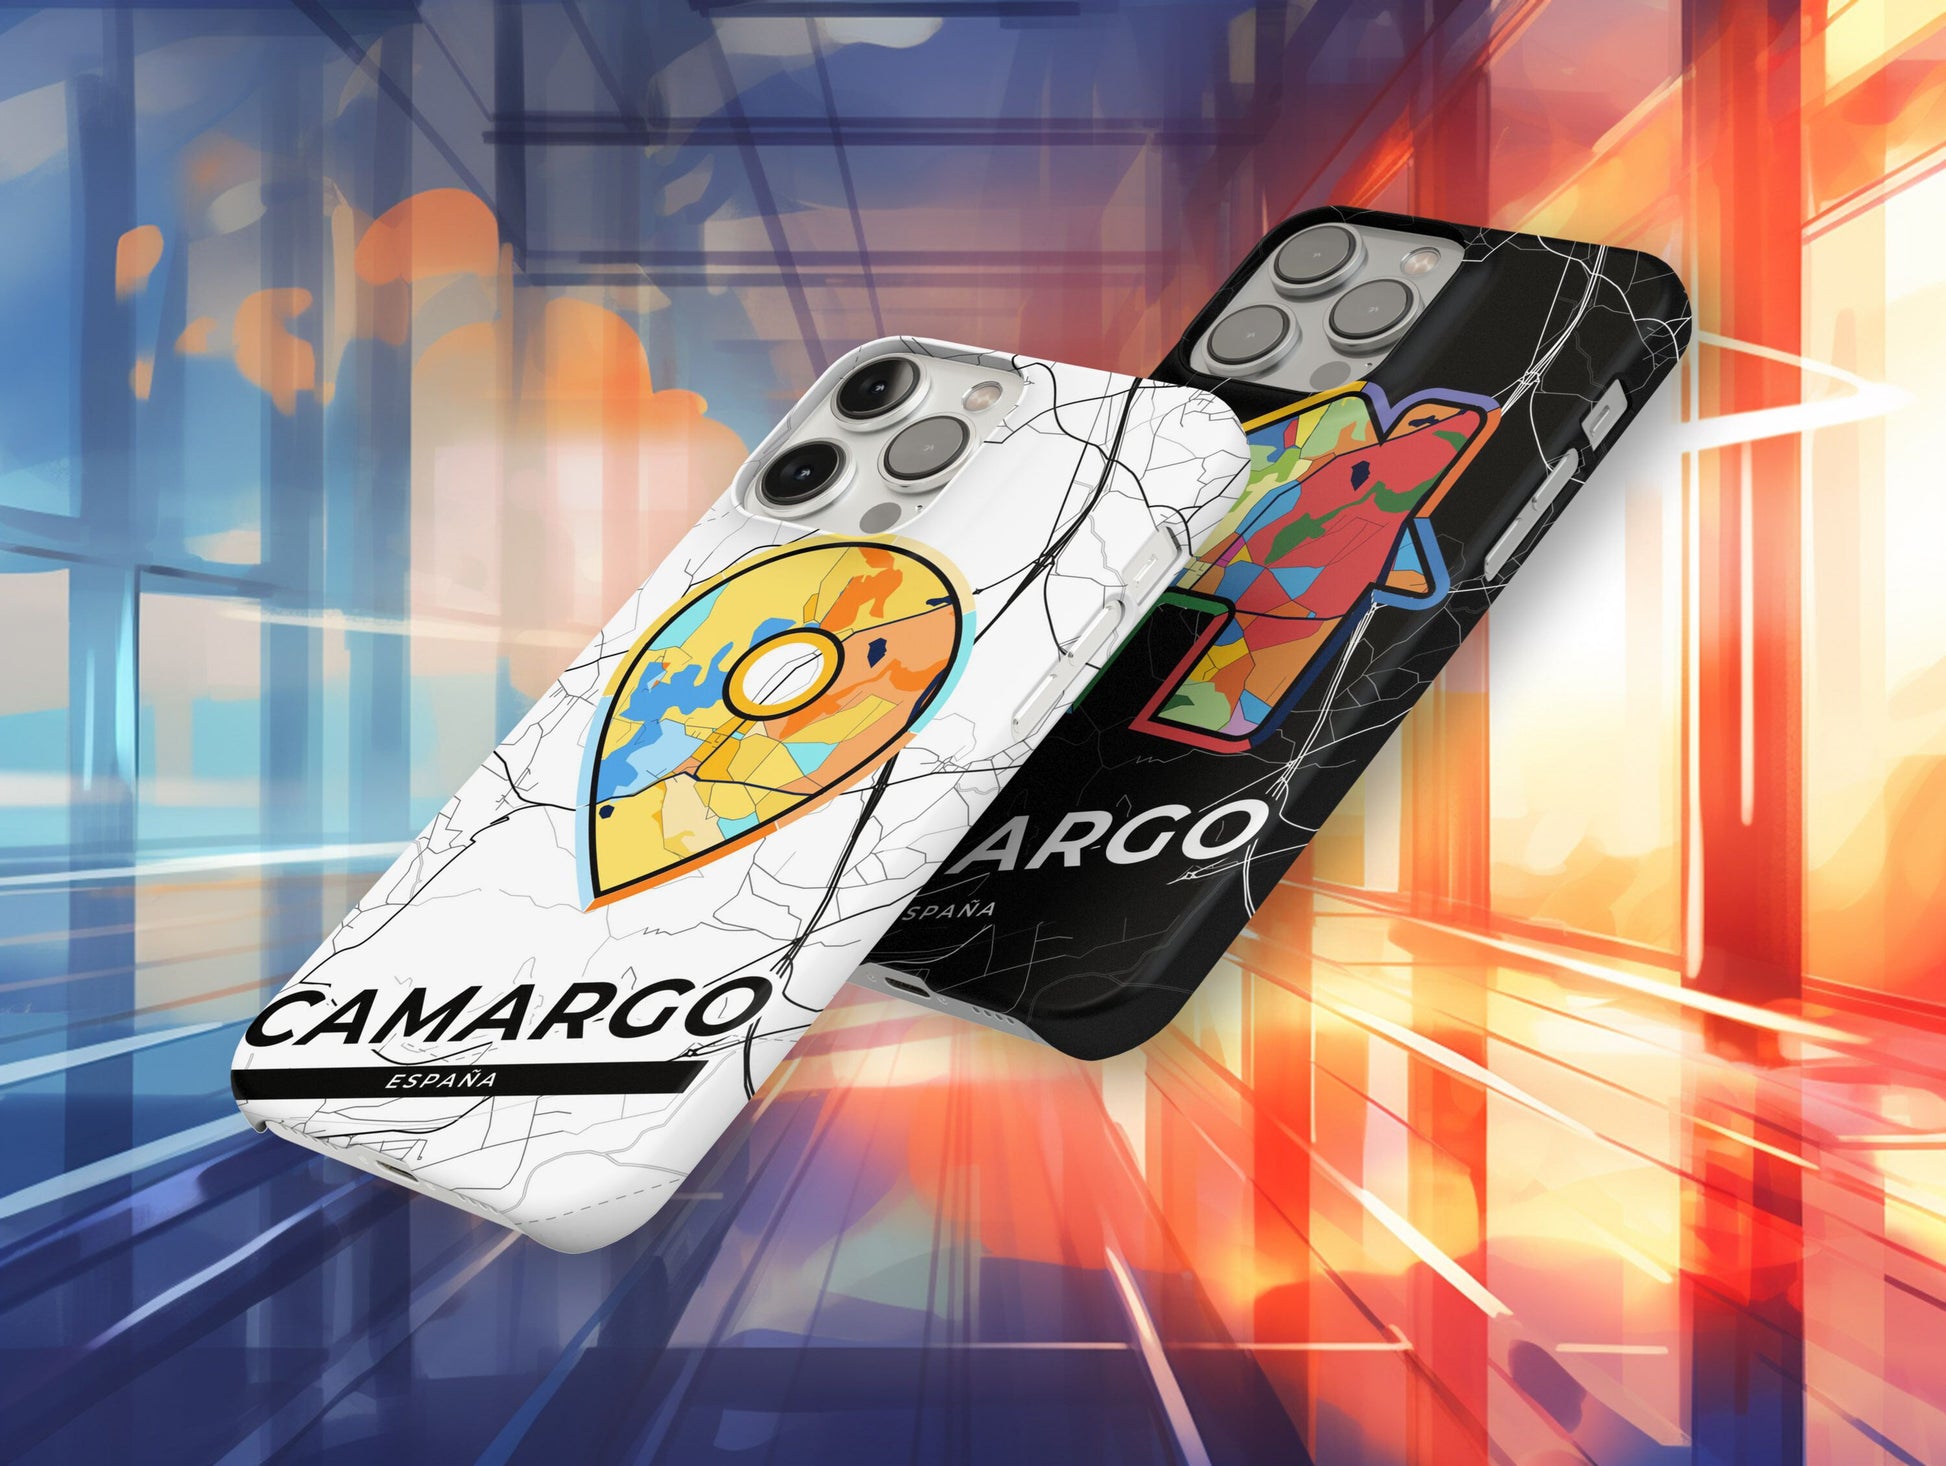 Camargo Spain slim phone case with colorful icon. Birthday, wedding or housewarming gift. Couple match cases.